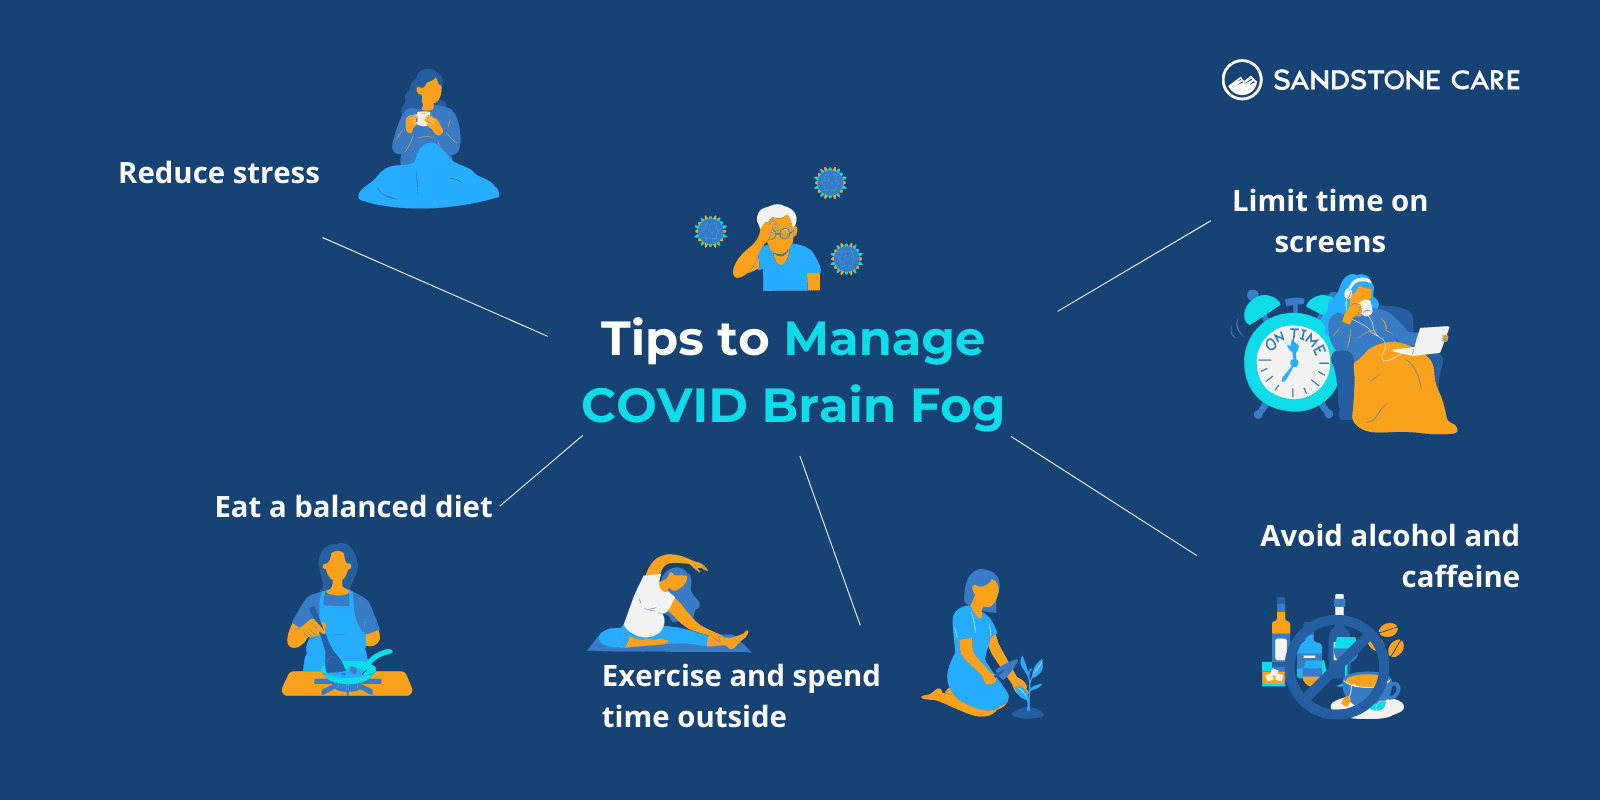 https://www.sandstonecare.com/wp-content/uploads/2023/01/Tips-to-manage-brain-fog-from-covid-infographic.png